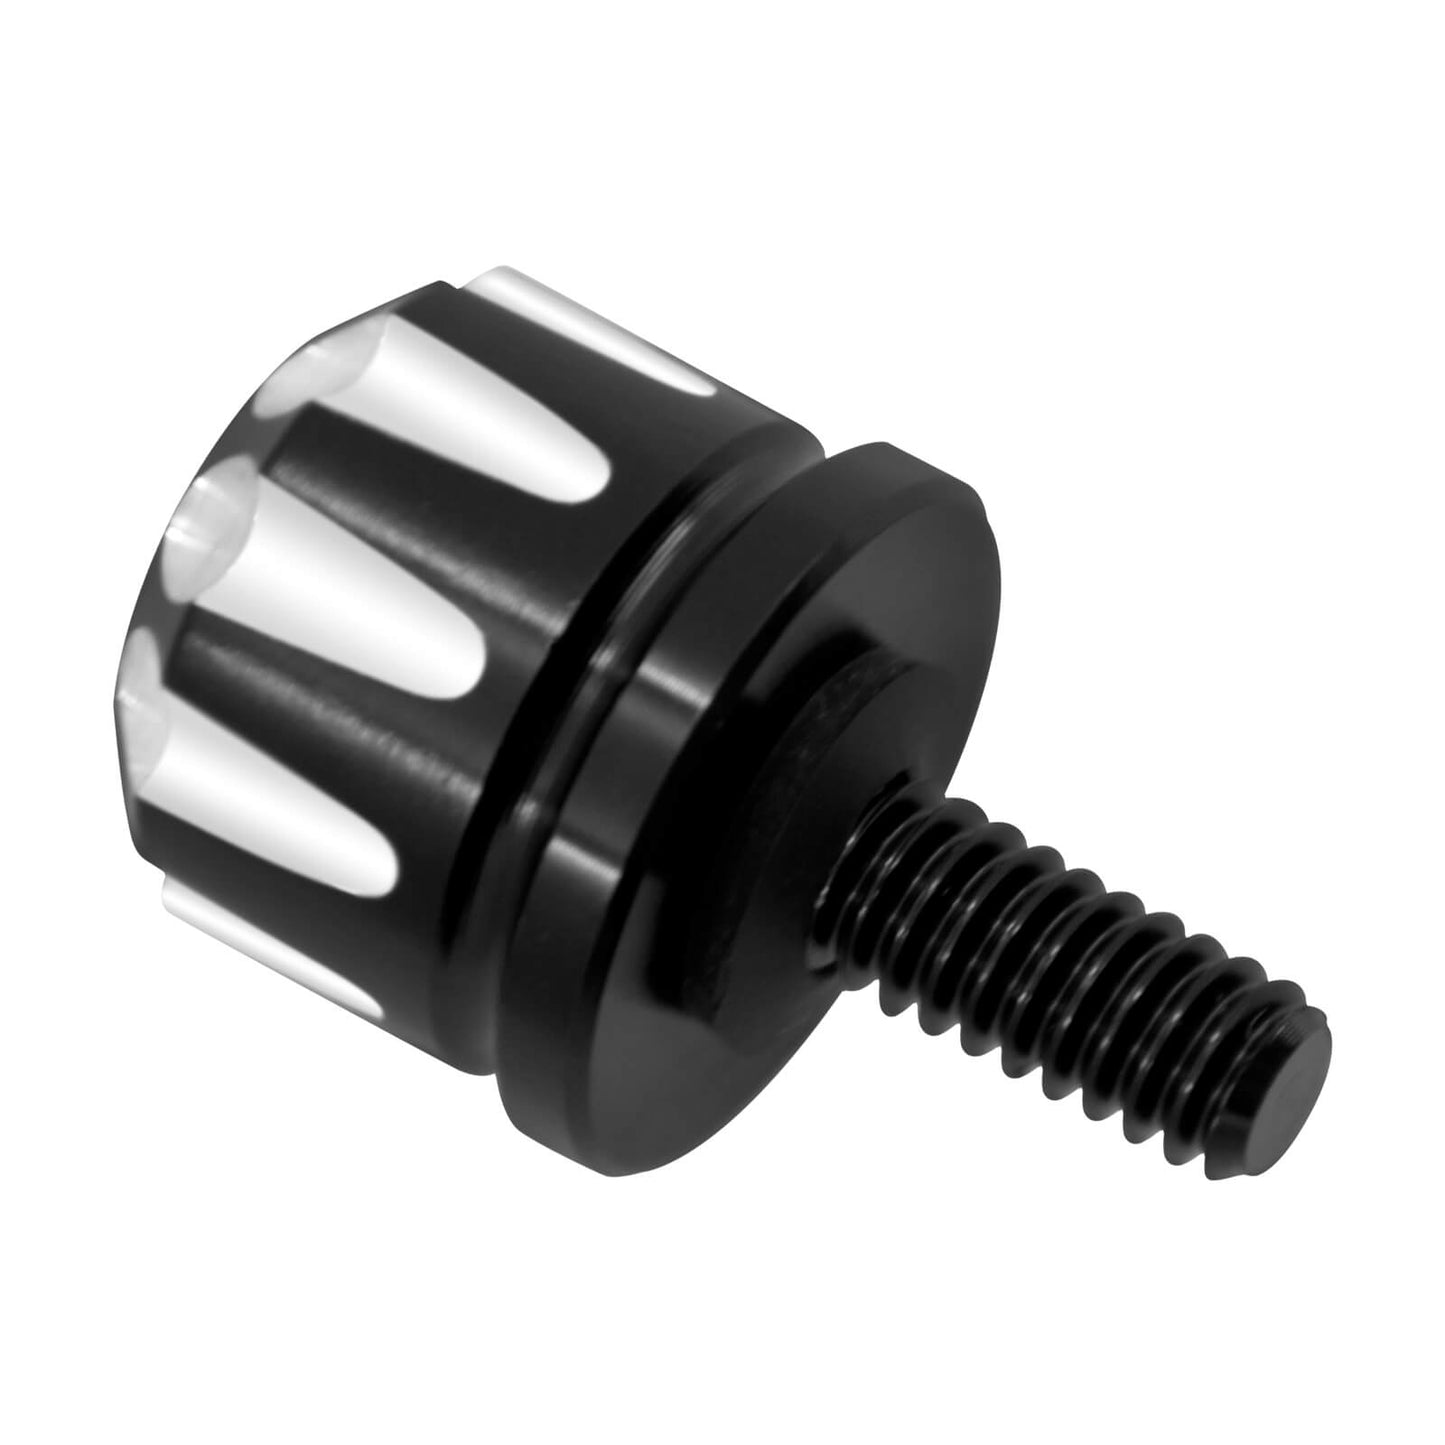 TH014101-motorcycle-seat-bolt-screw-for-harley